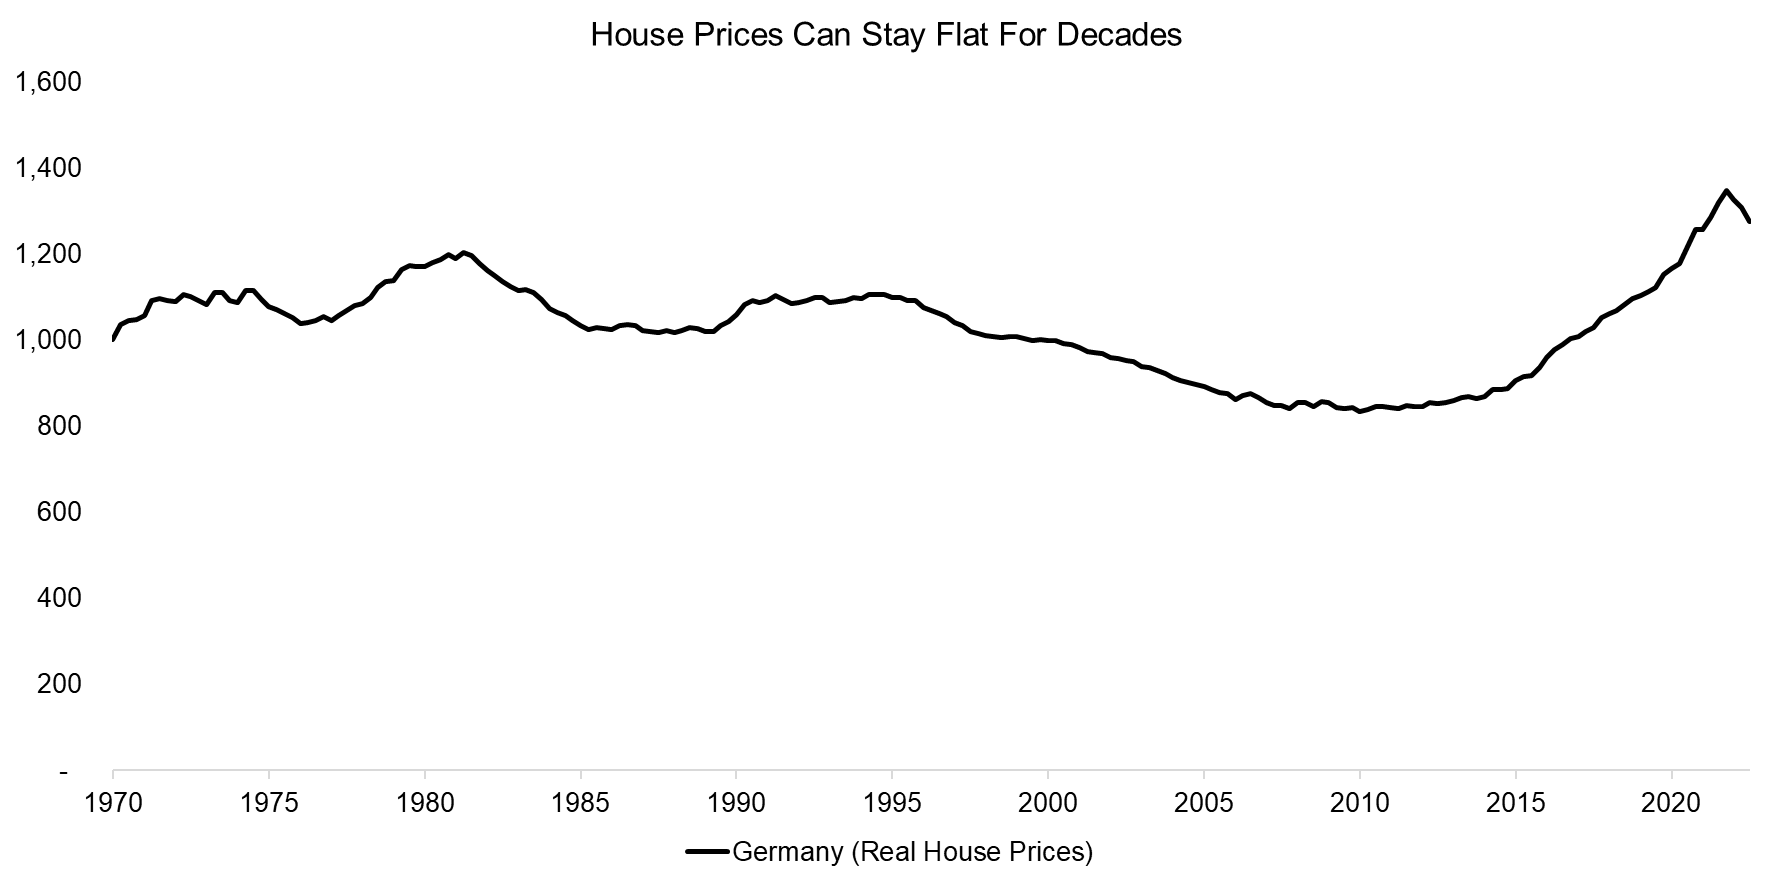 House Prices Can Stay Flat For Decades